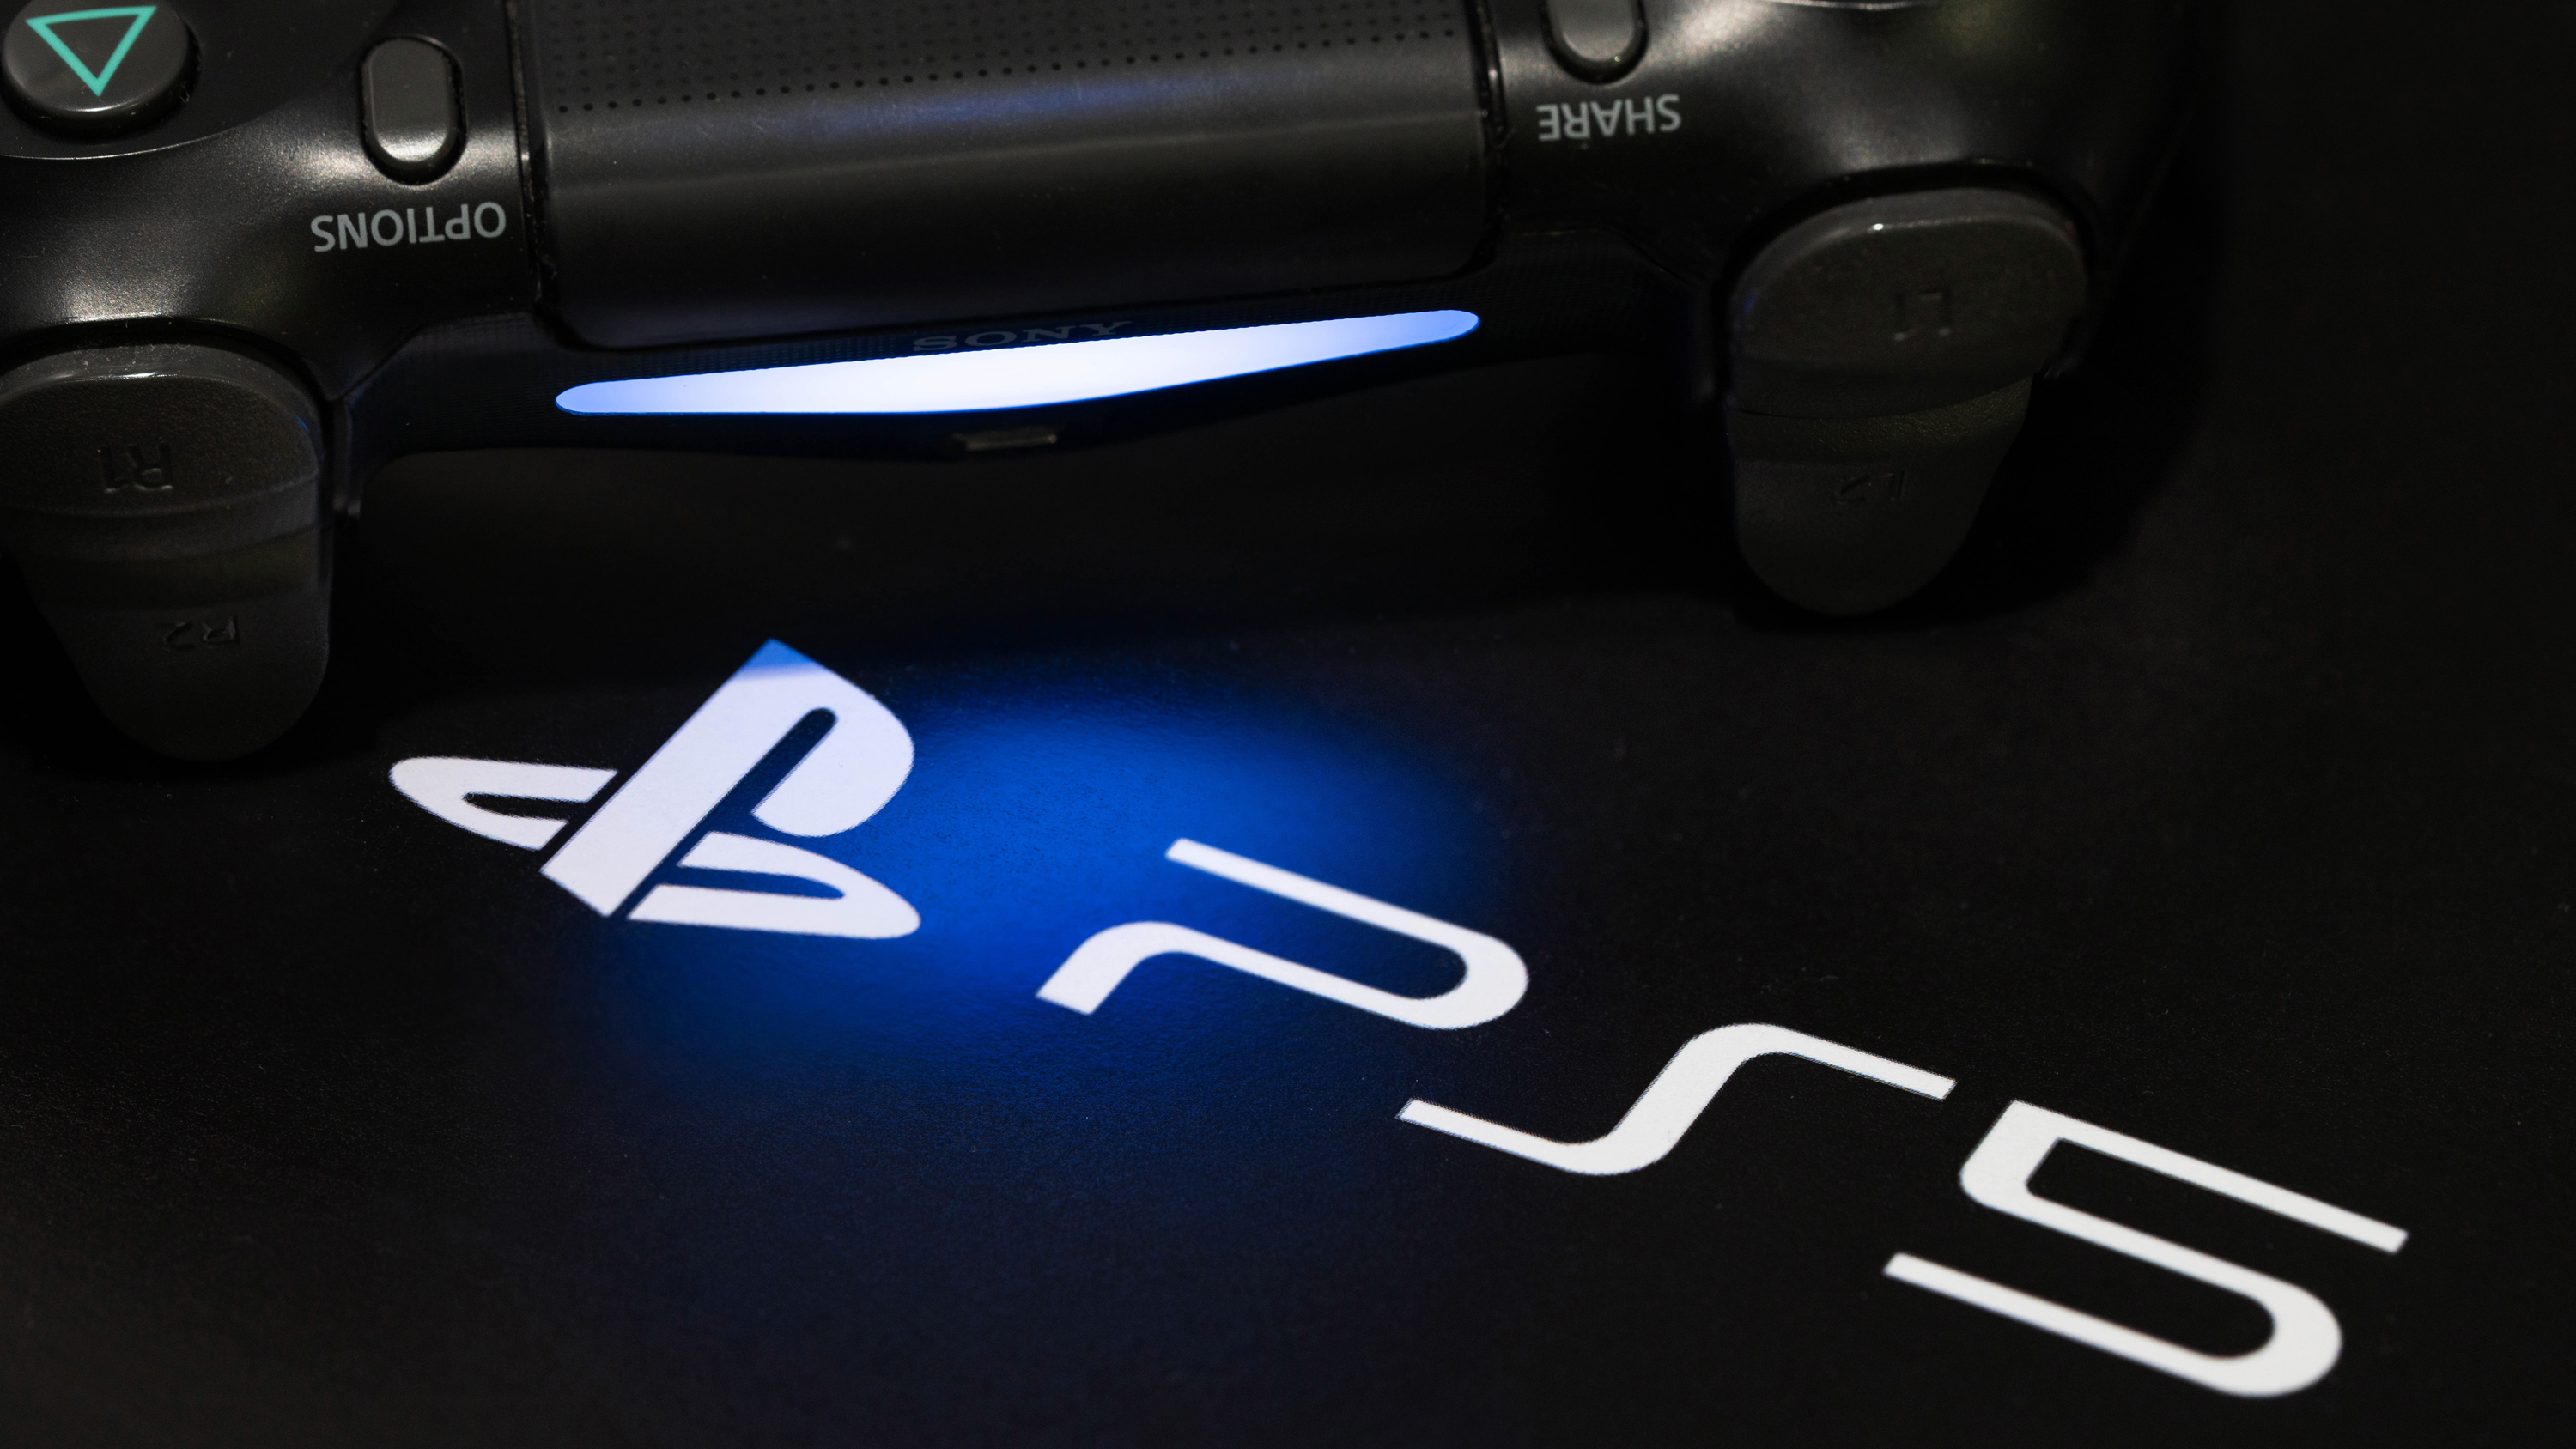 Sony claims PS5 is 100 times faster than PS4, thanks to its speedy SSD